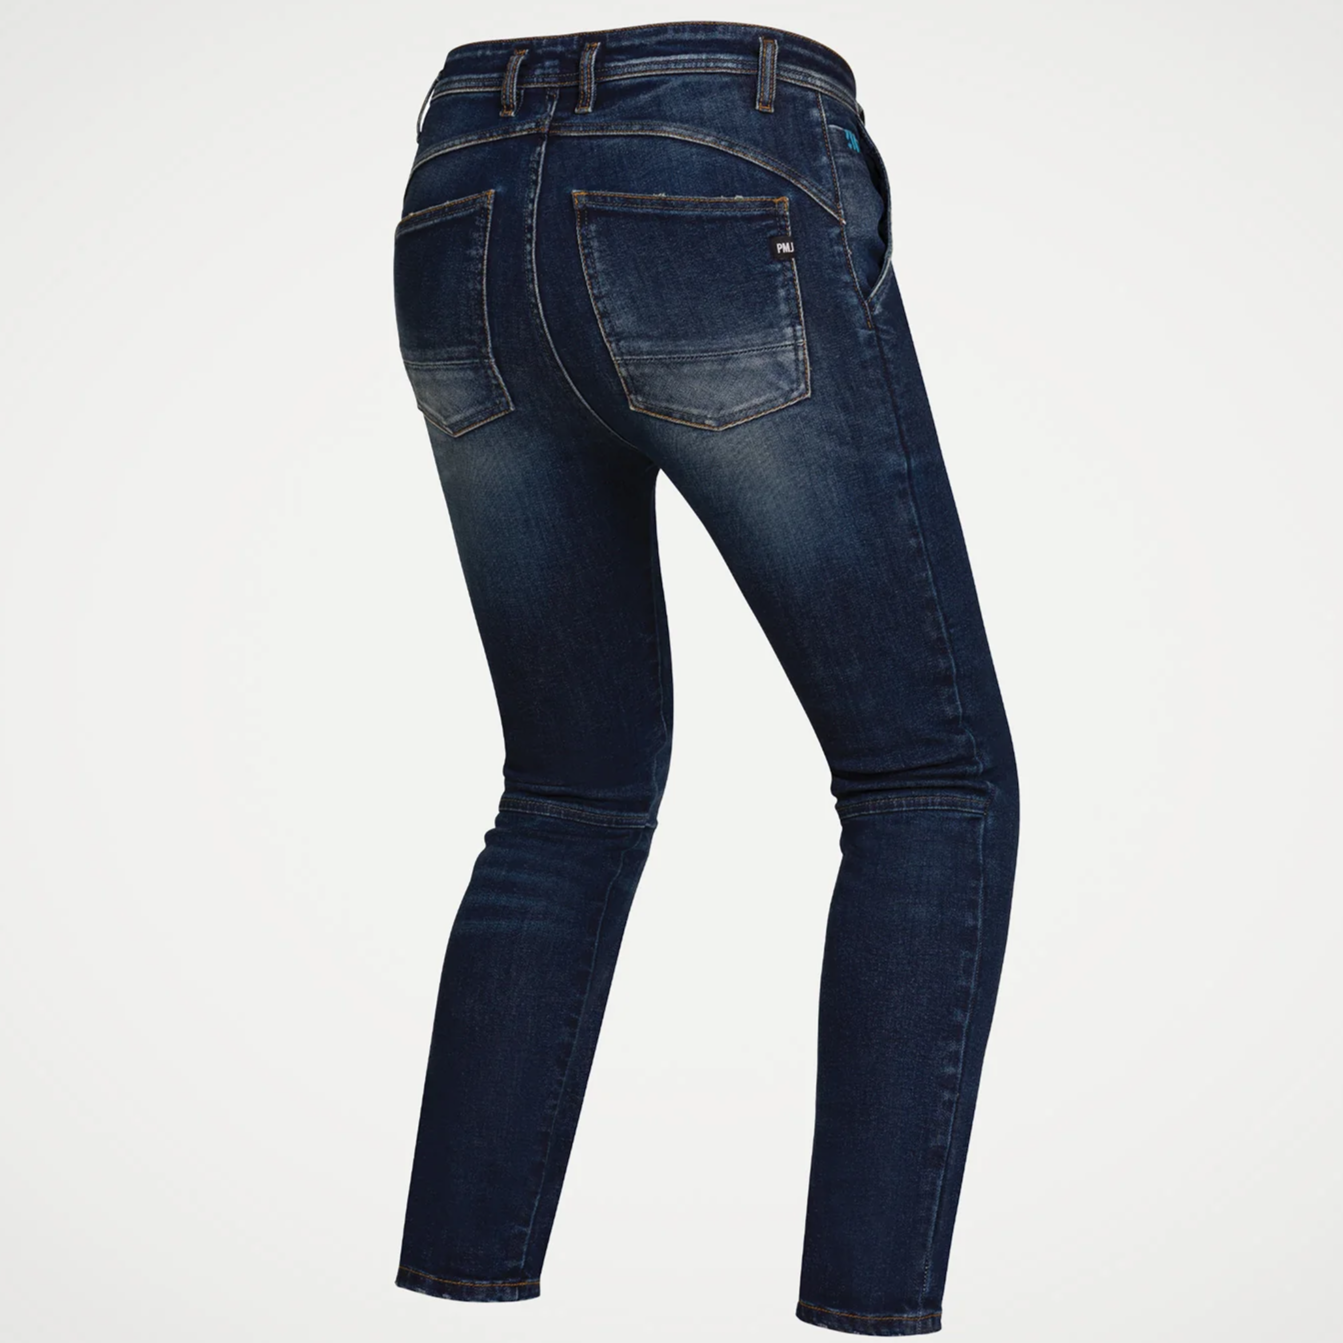 PMJ JEANS RUSSELL MODELL T-STRETCH 96% BLAU FARBE